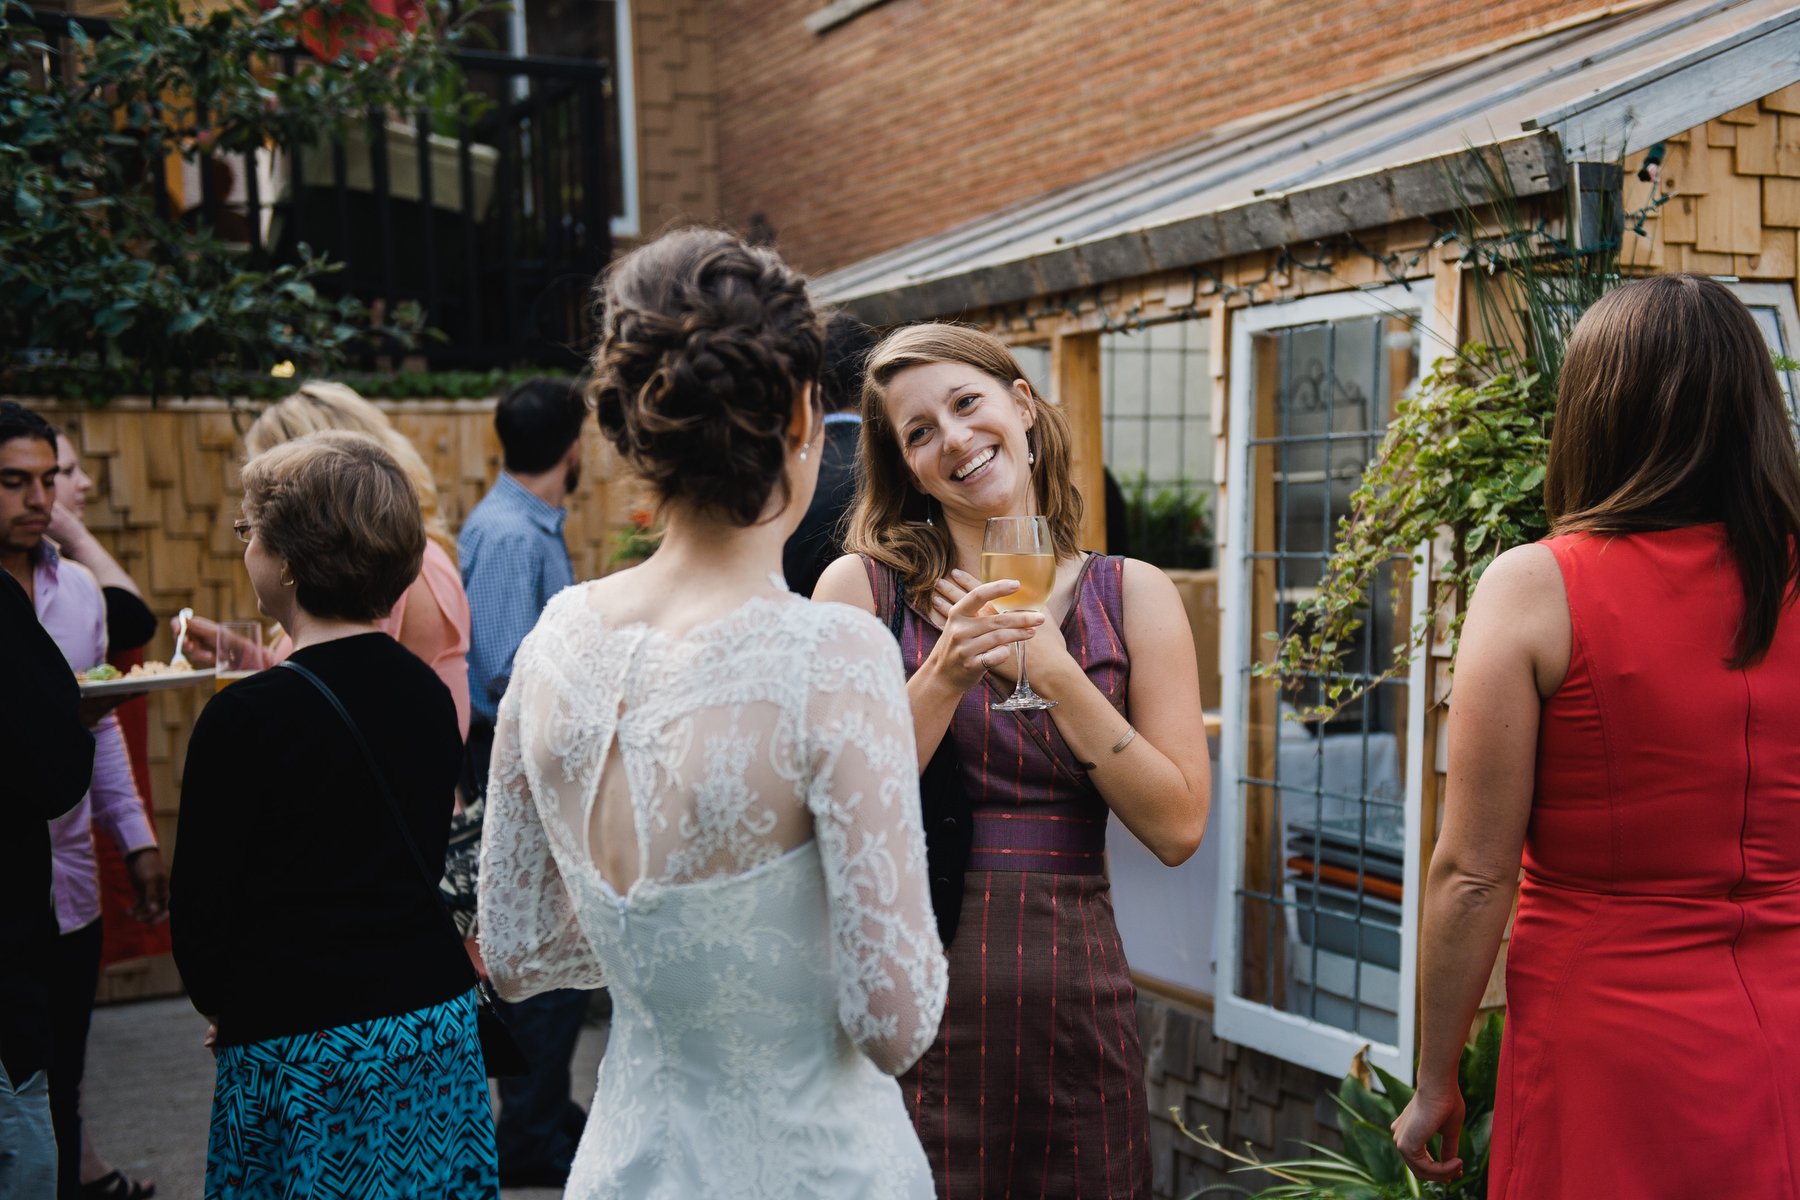 chatting with guests at her backyard wedding